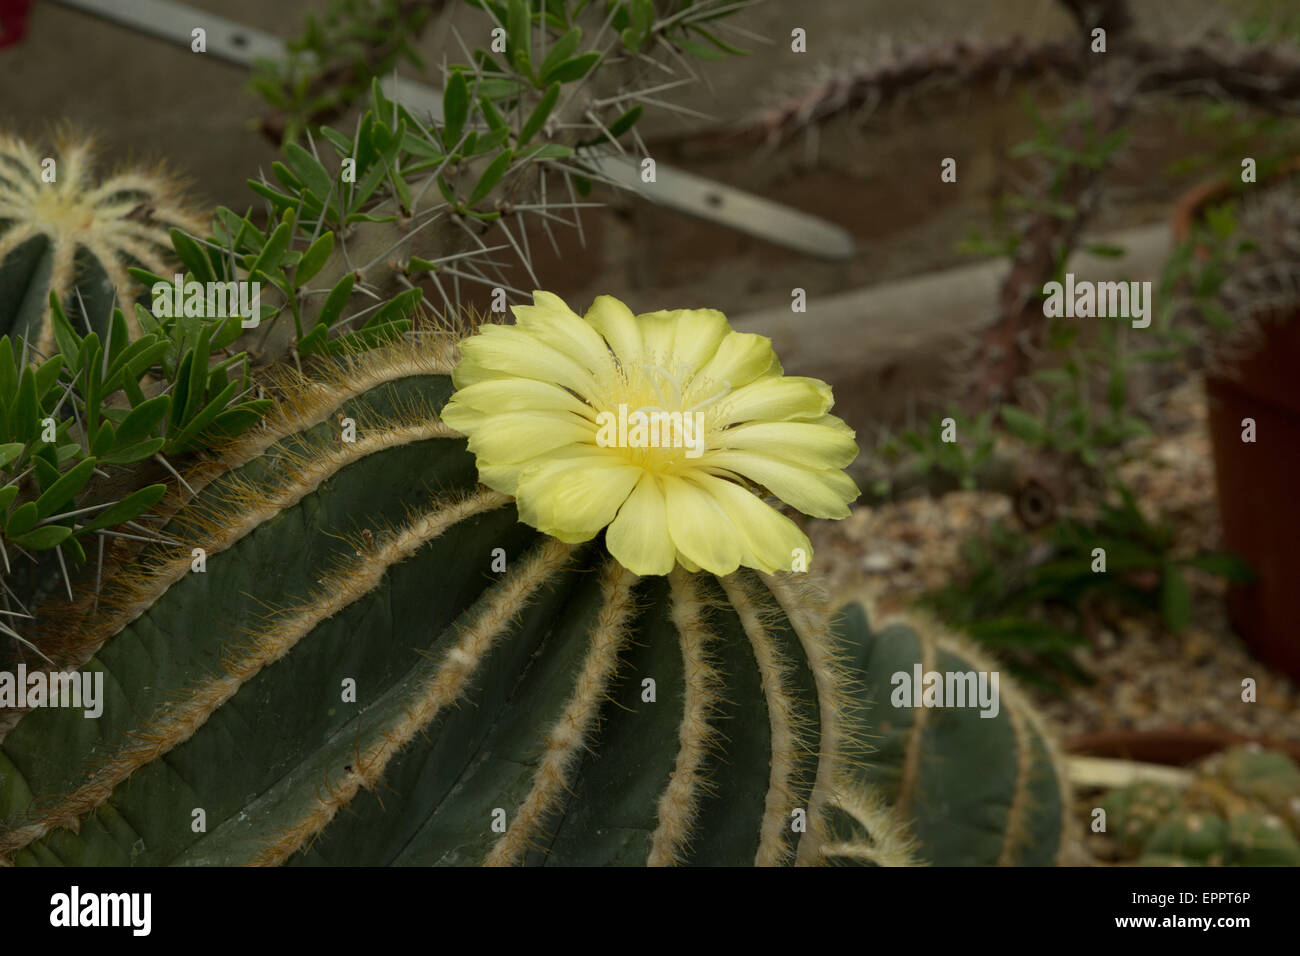 A photograph of a yellow cactus flower blooming. This particular cactus is a Parodia magnifica. Stock Photo